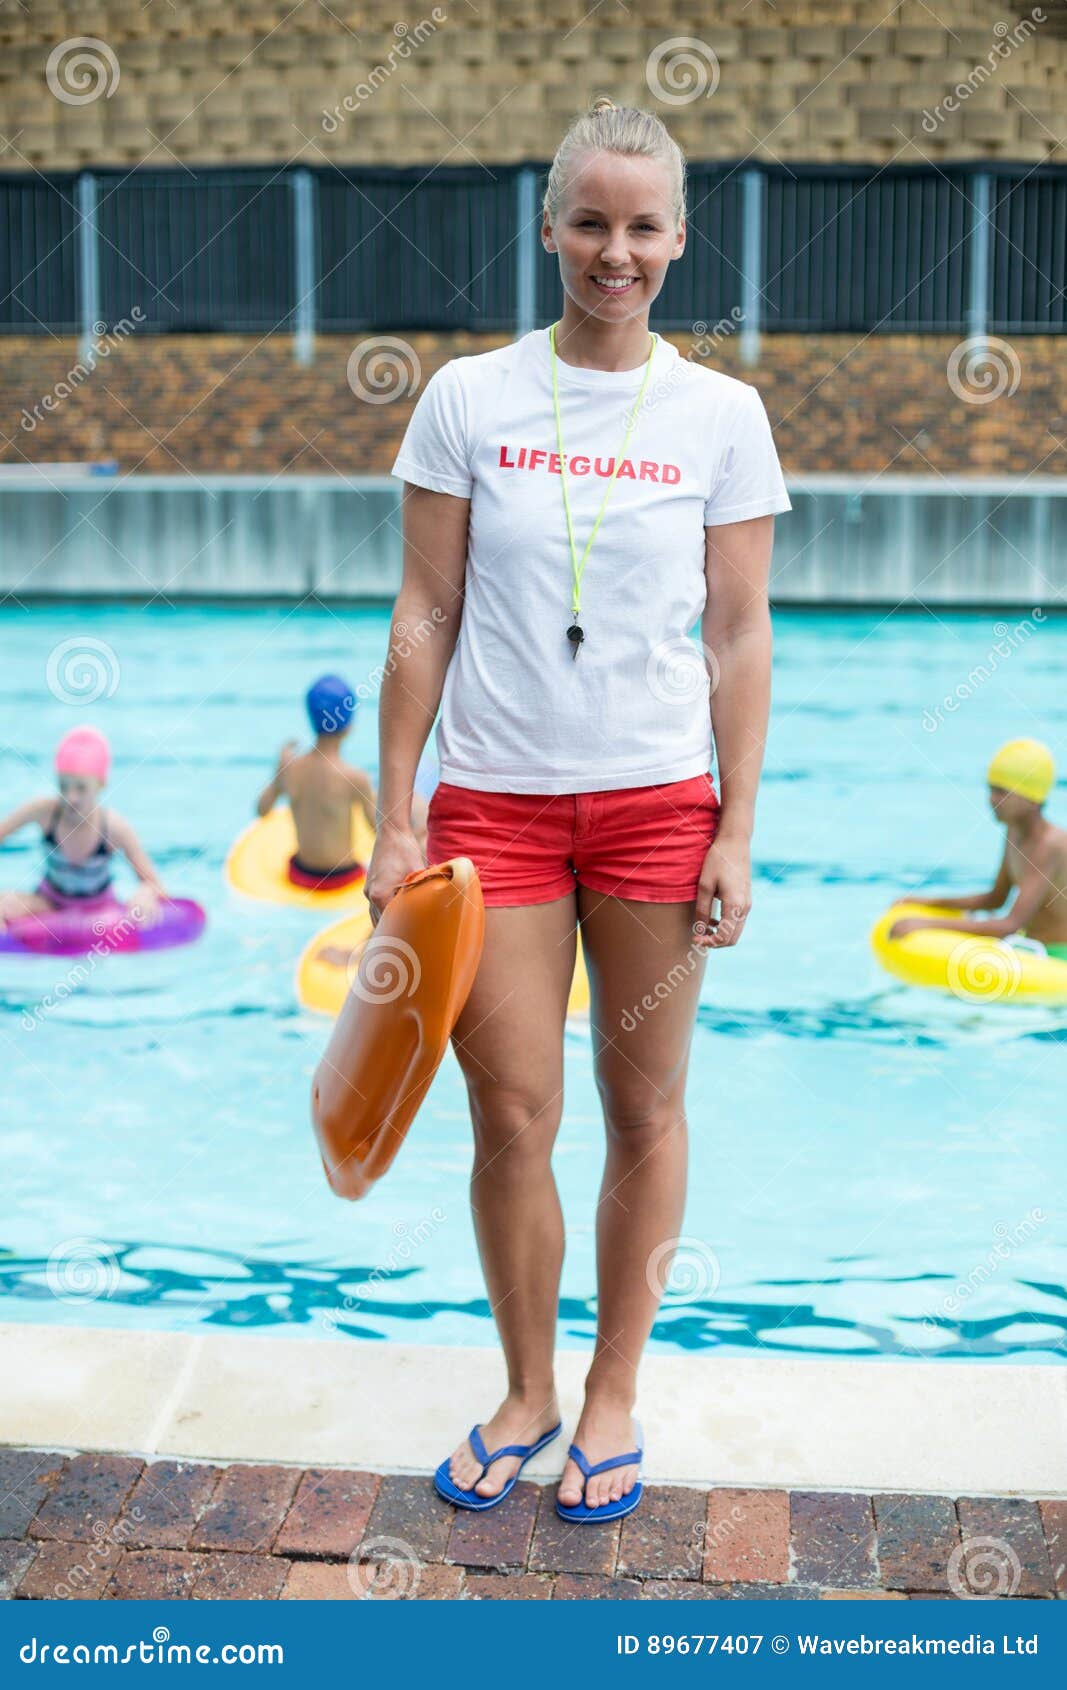 Female Lifeguard Holding Rescue Can at Poolside Stock Image